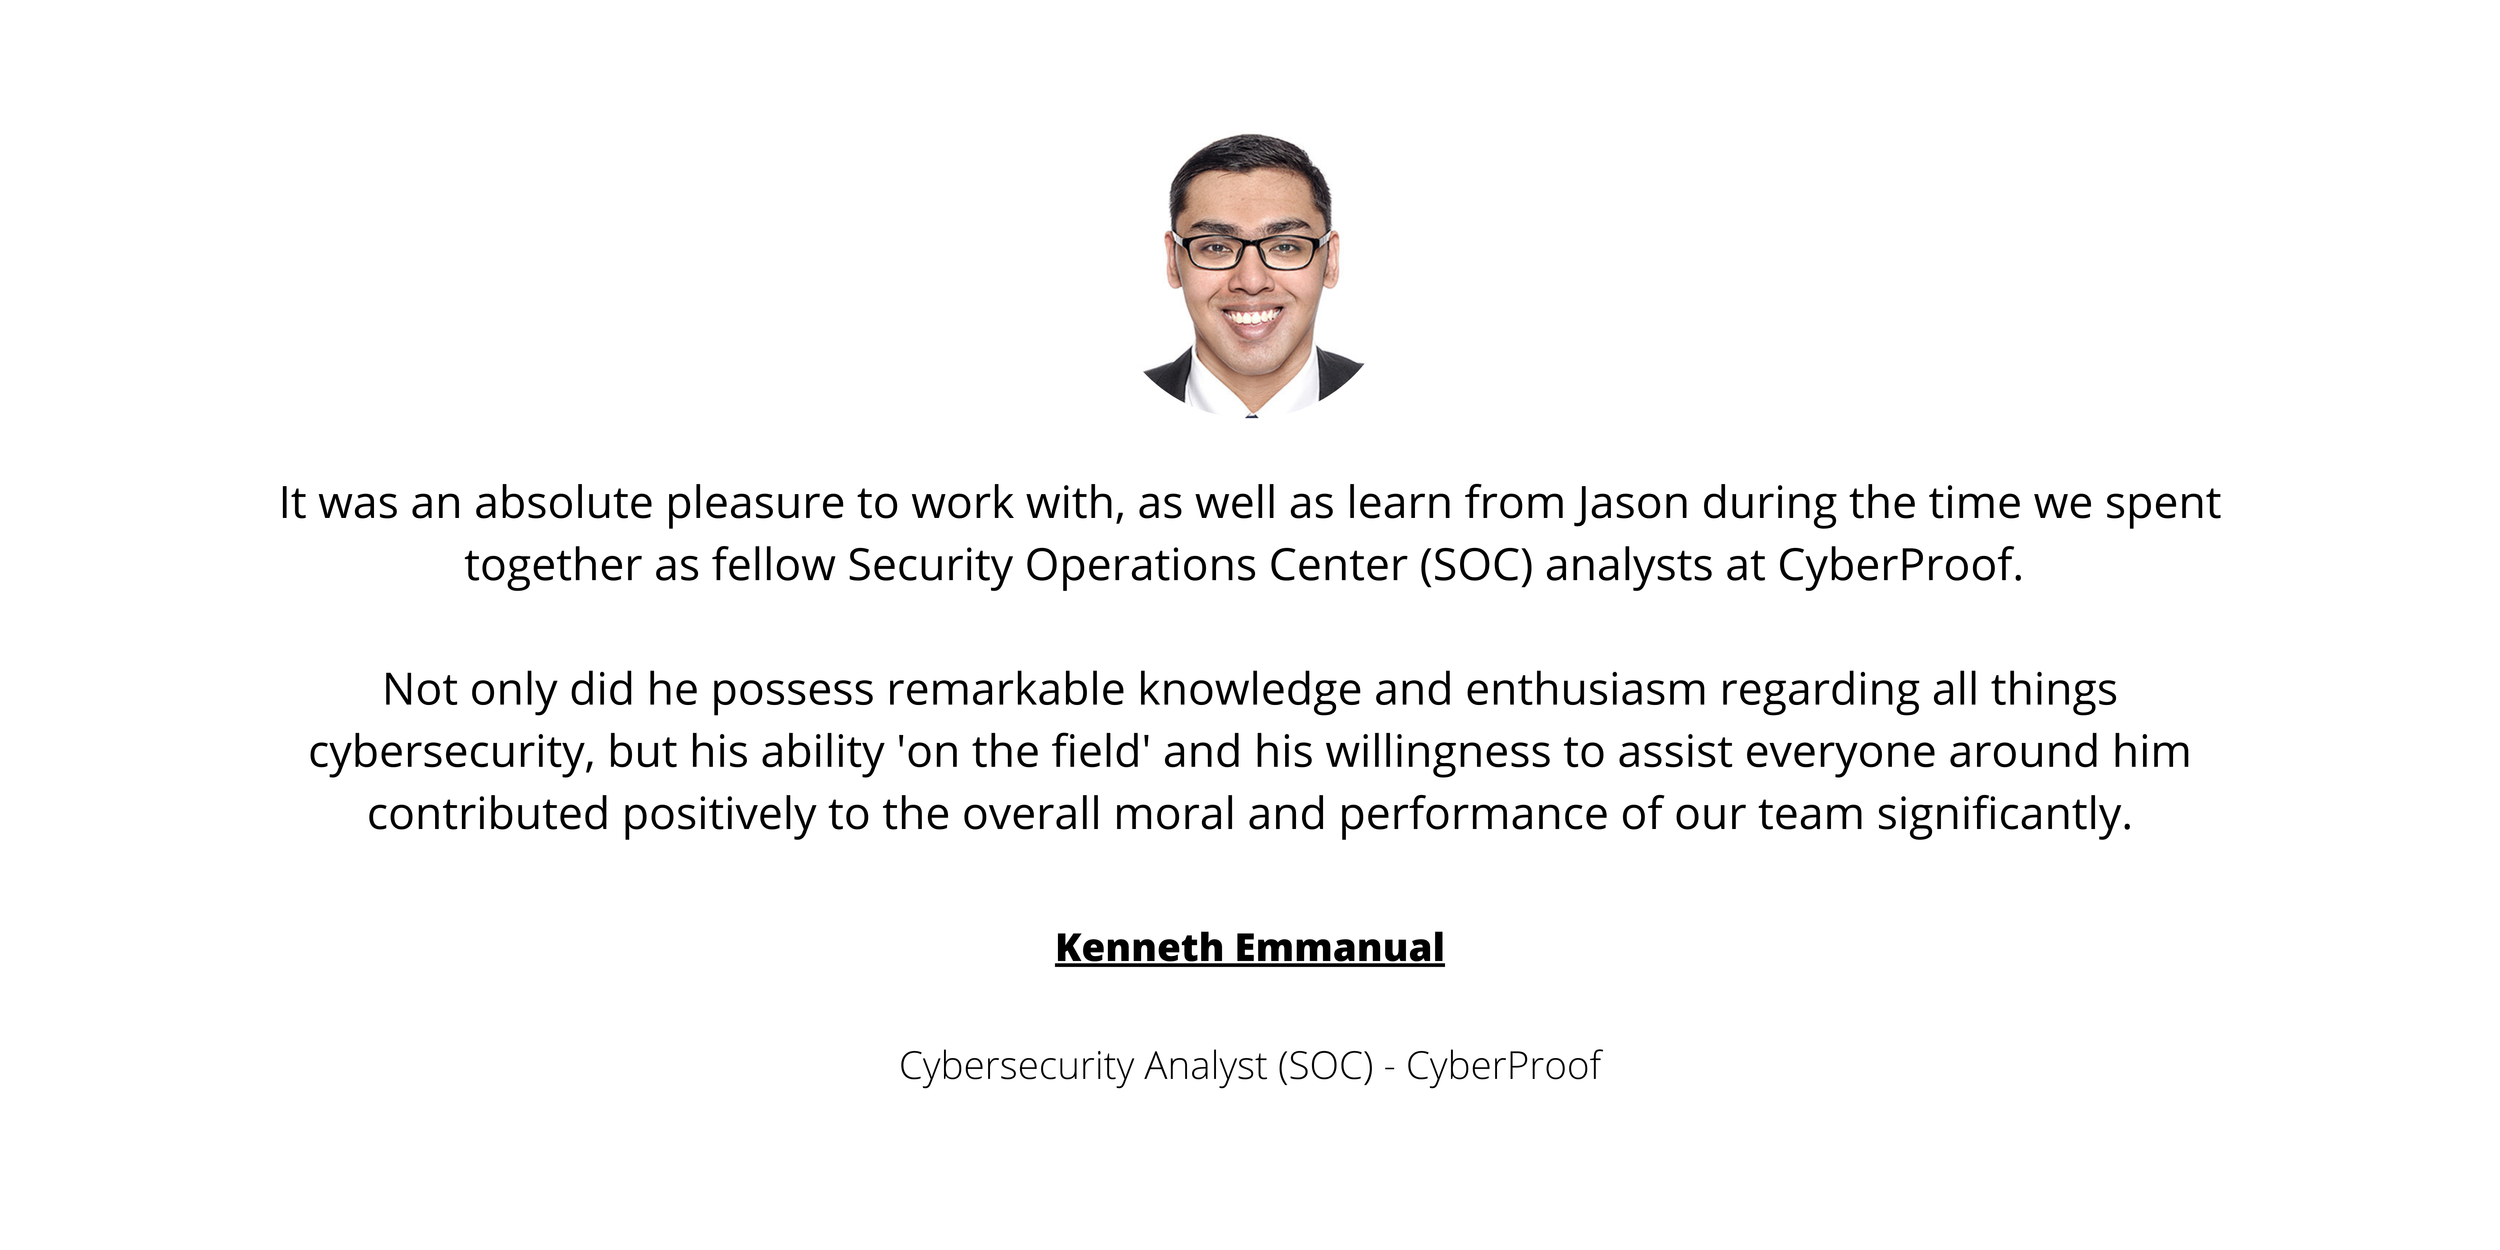 e while working for about 6 months internship in CyberProof. He has shown strong interests and inclinations towards Cyber Security and the desire to learn more..png